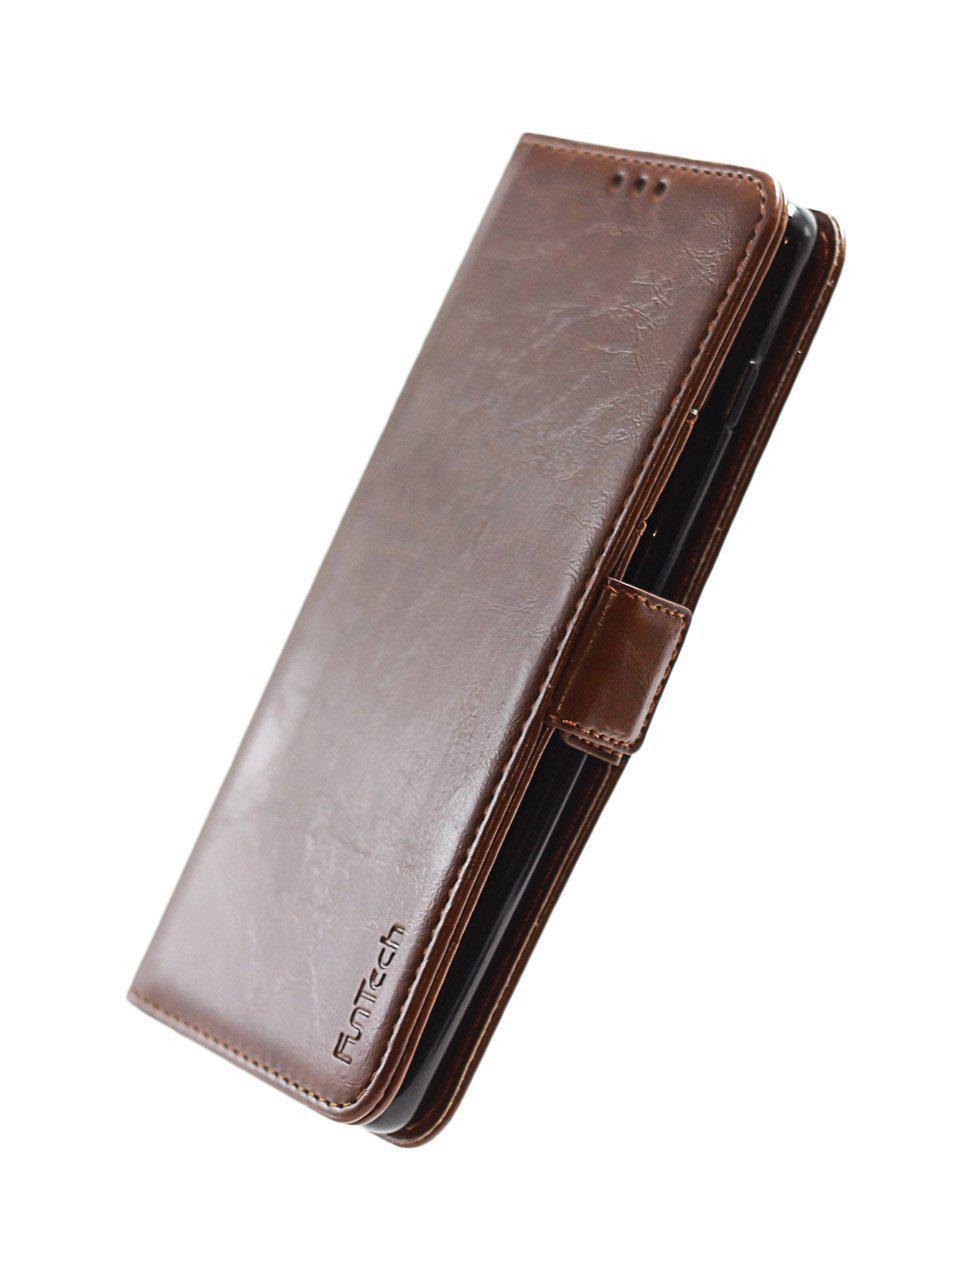 Samsung S10 Plus Leather Case Brown